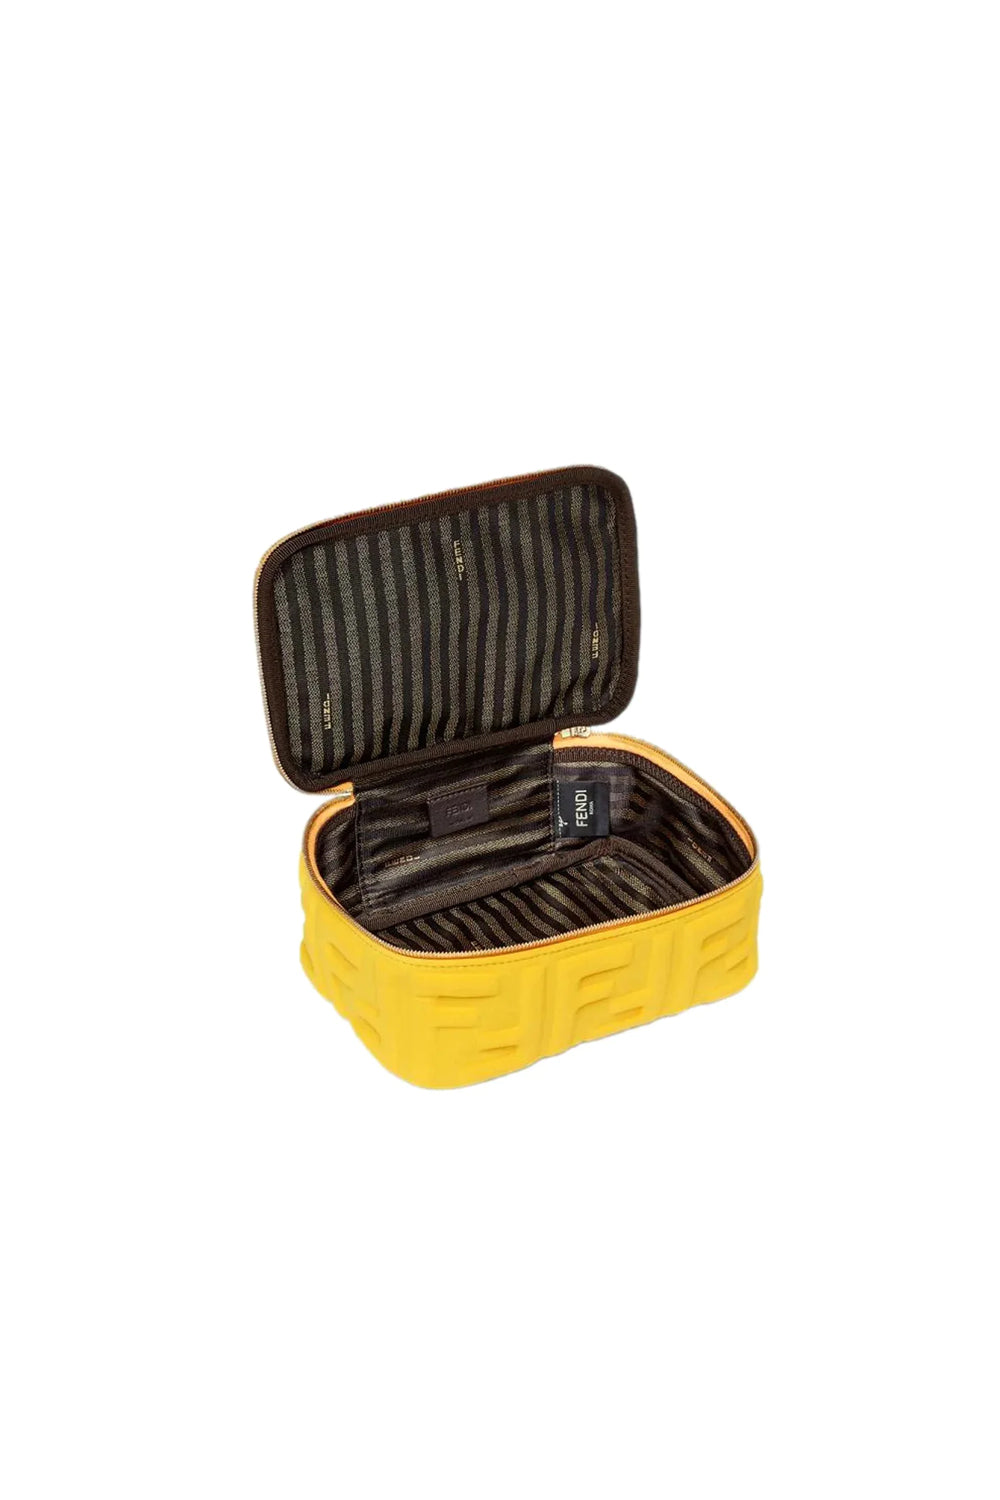 Fendi FF Embossed Lycra Small Yellow Cosmetic Case